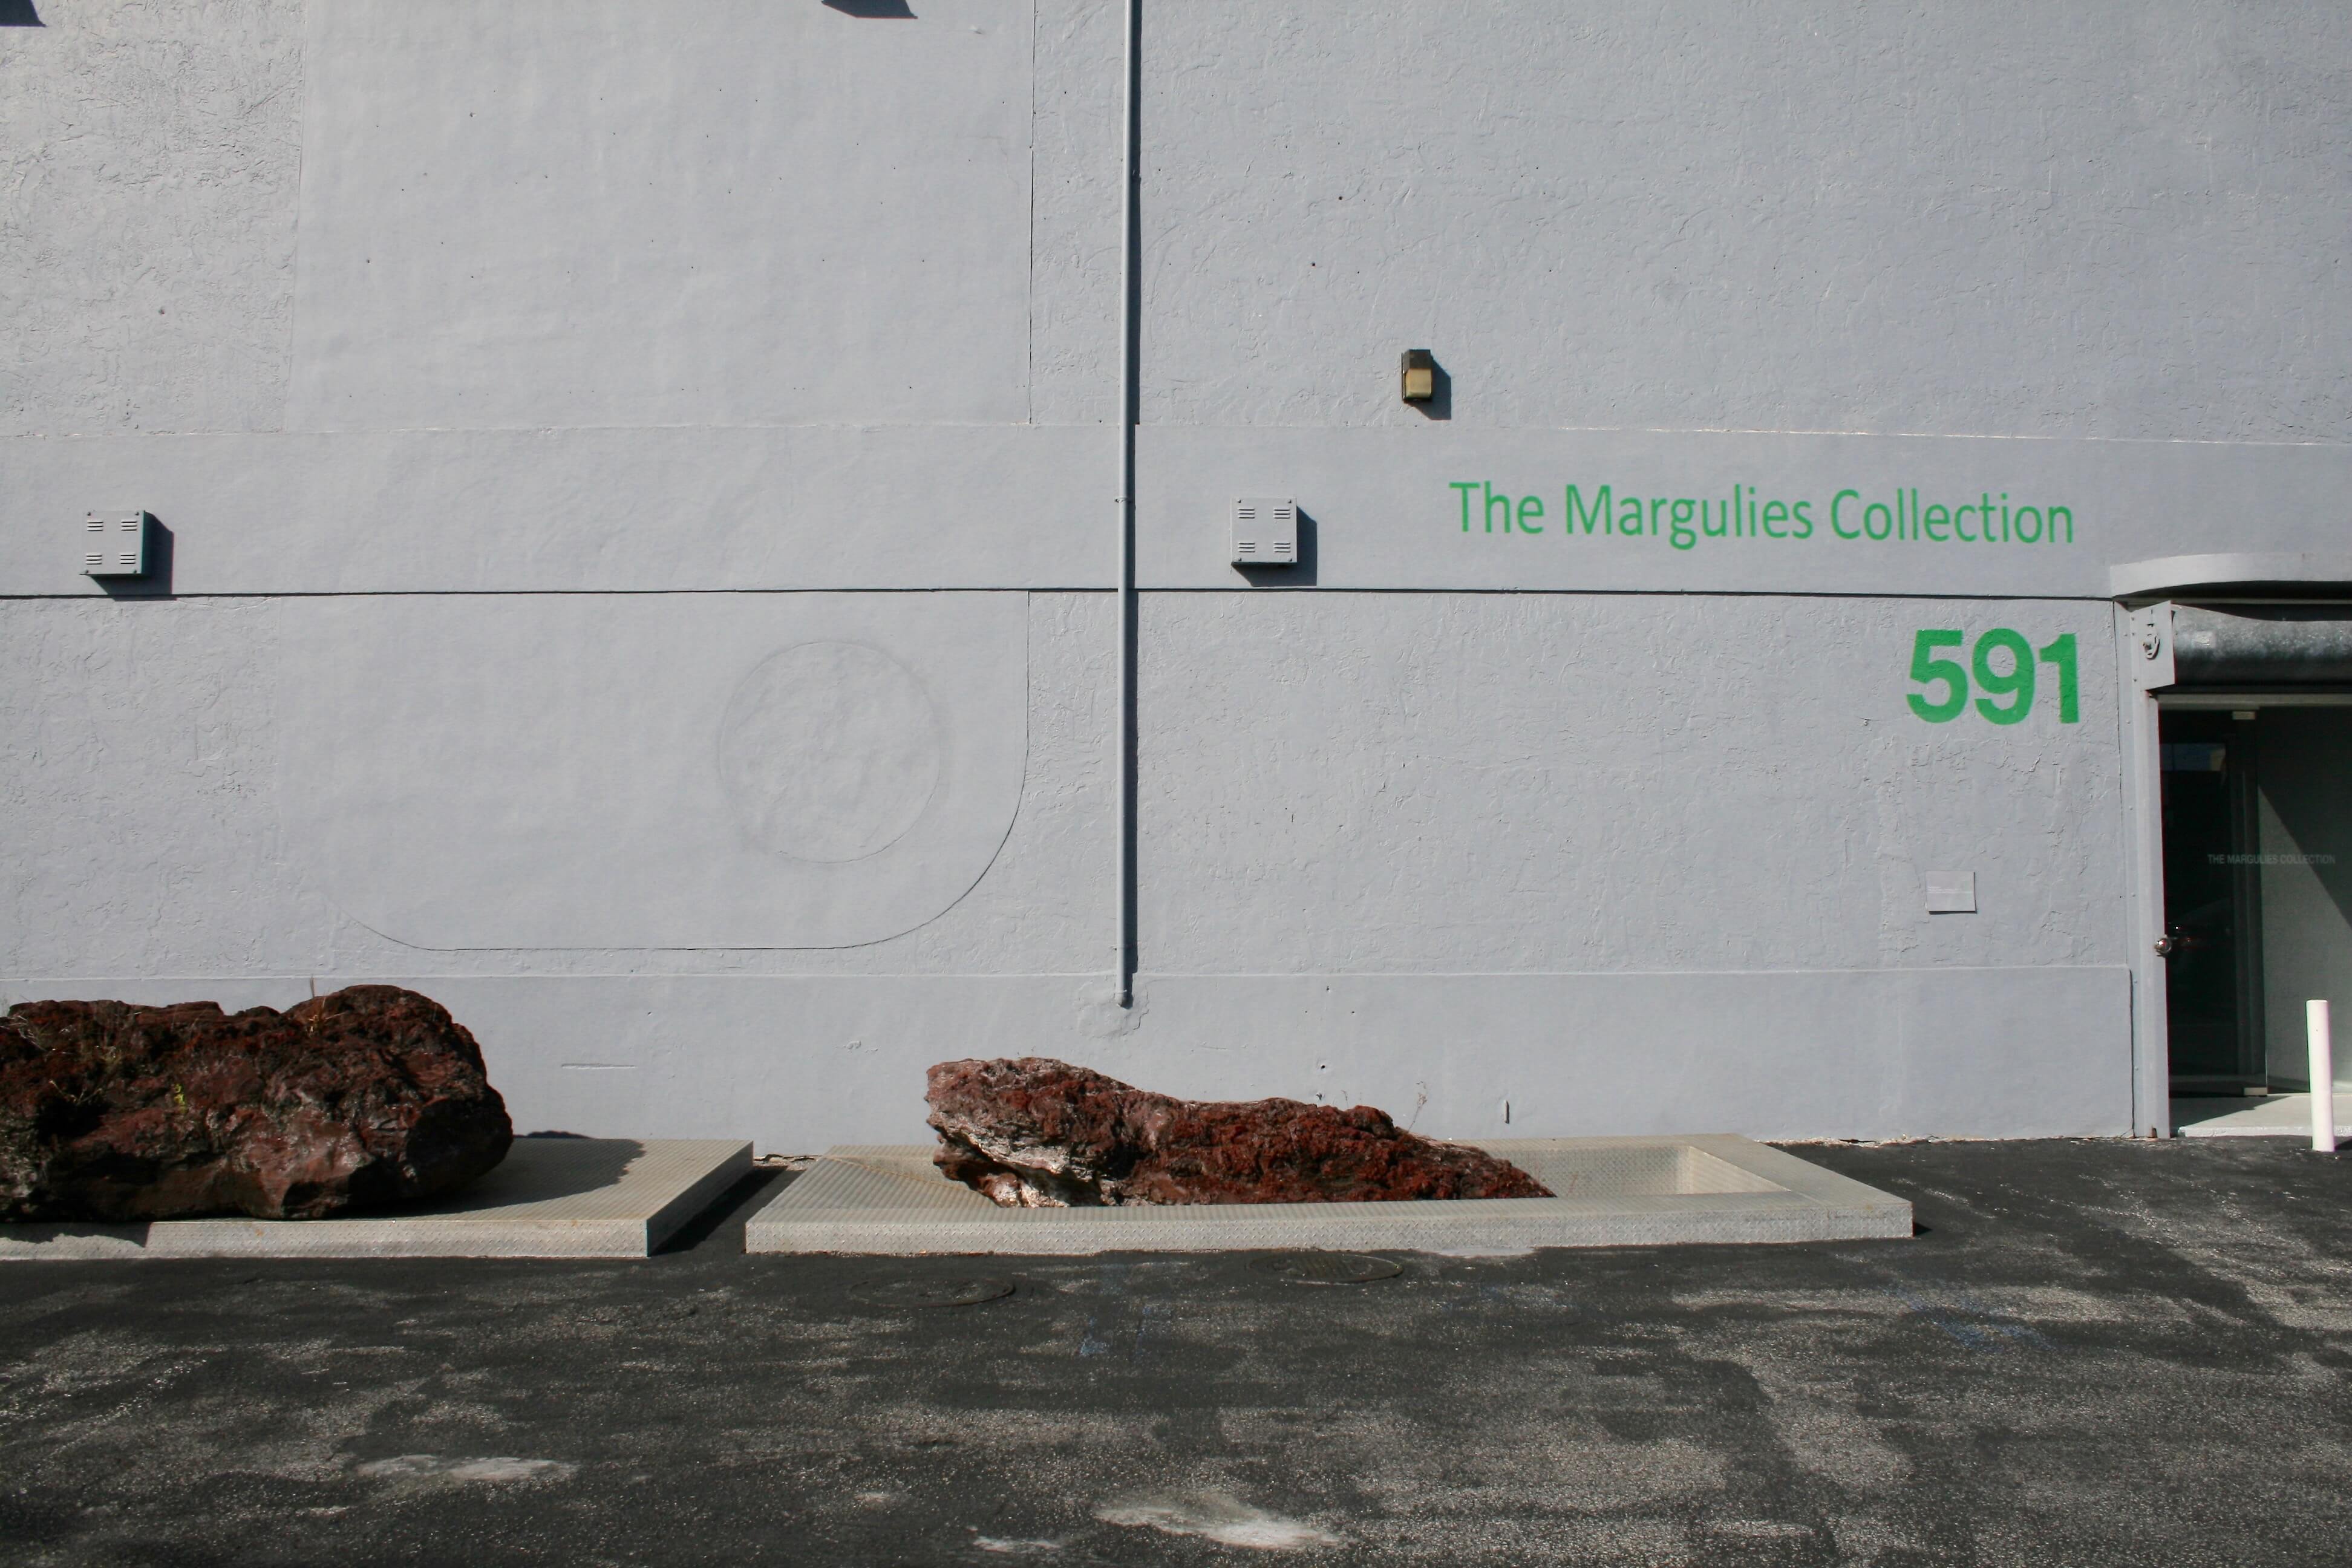 The Margulies Collection